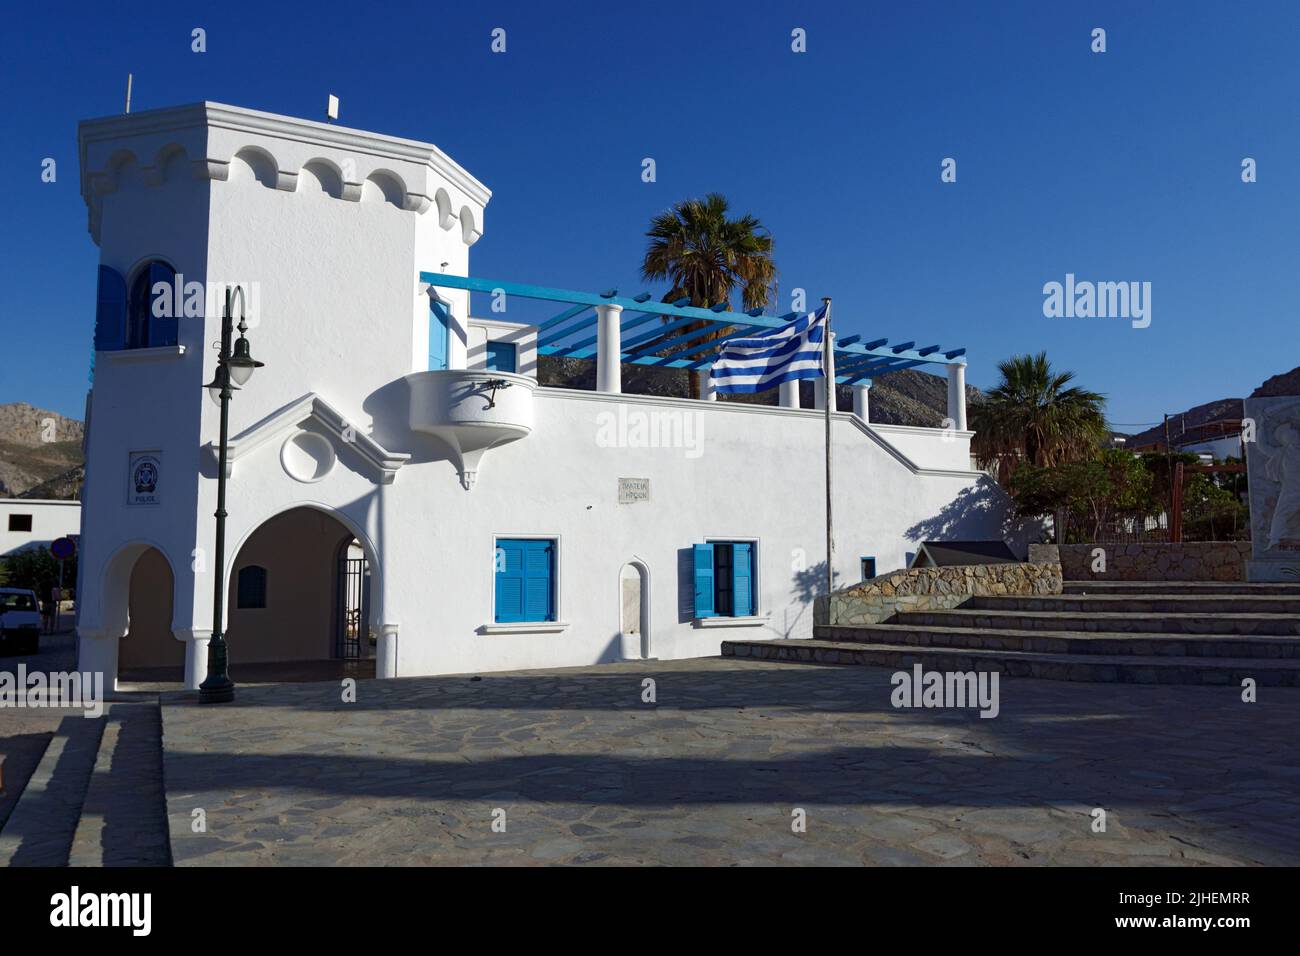 Police Station, built by the Italians during the occupation in the razionalismo style, Tilos, Dodecanese islands, Southern Aegean, Greece. Stock Photo